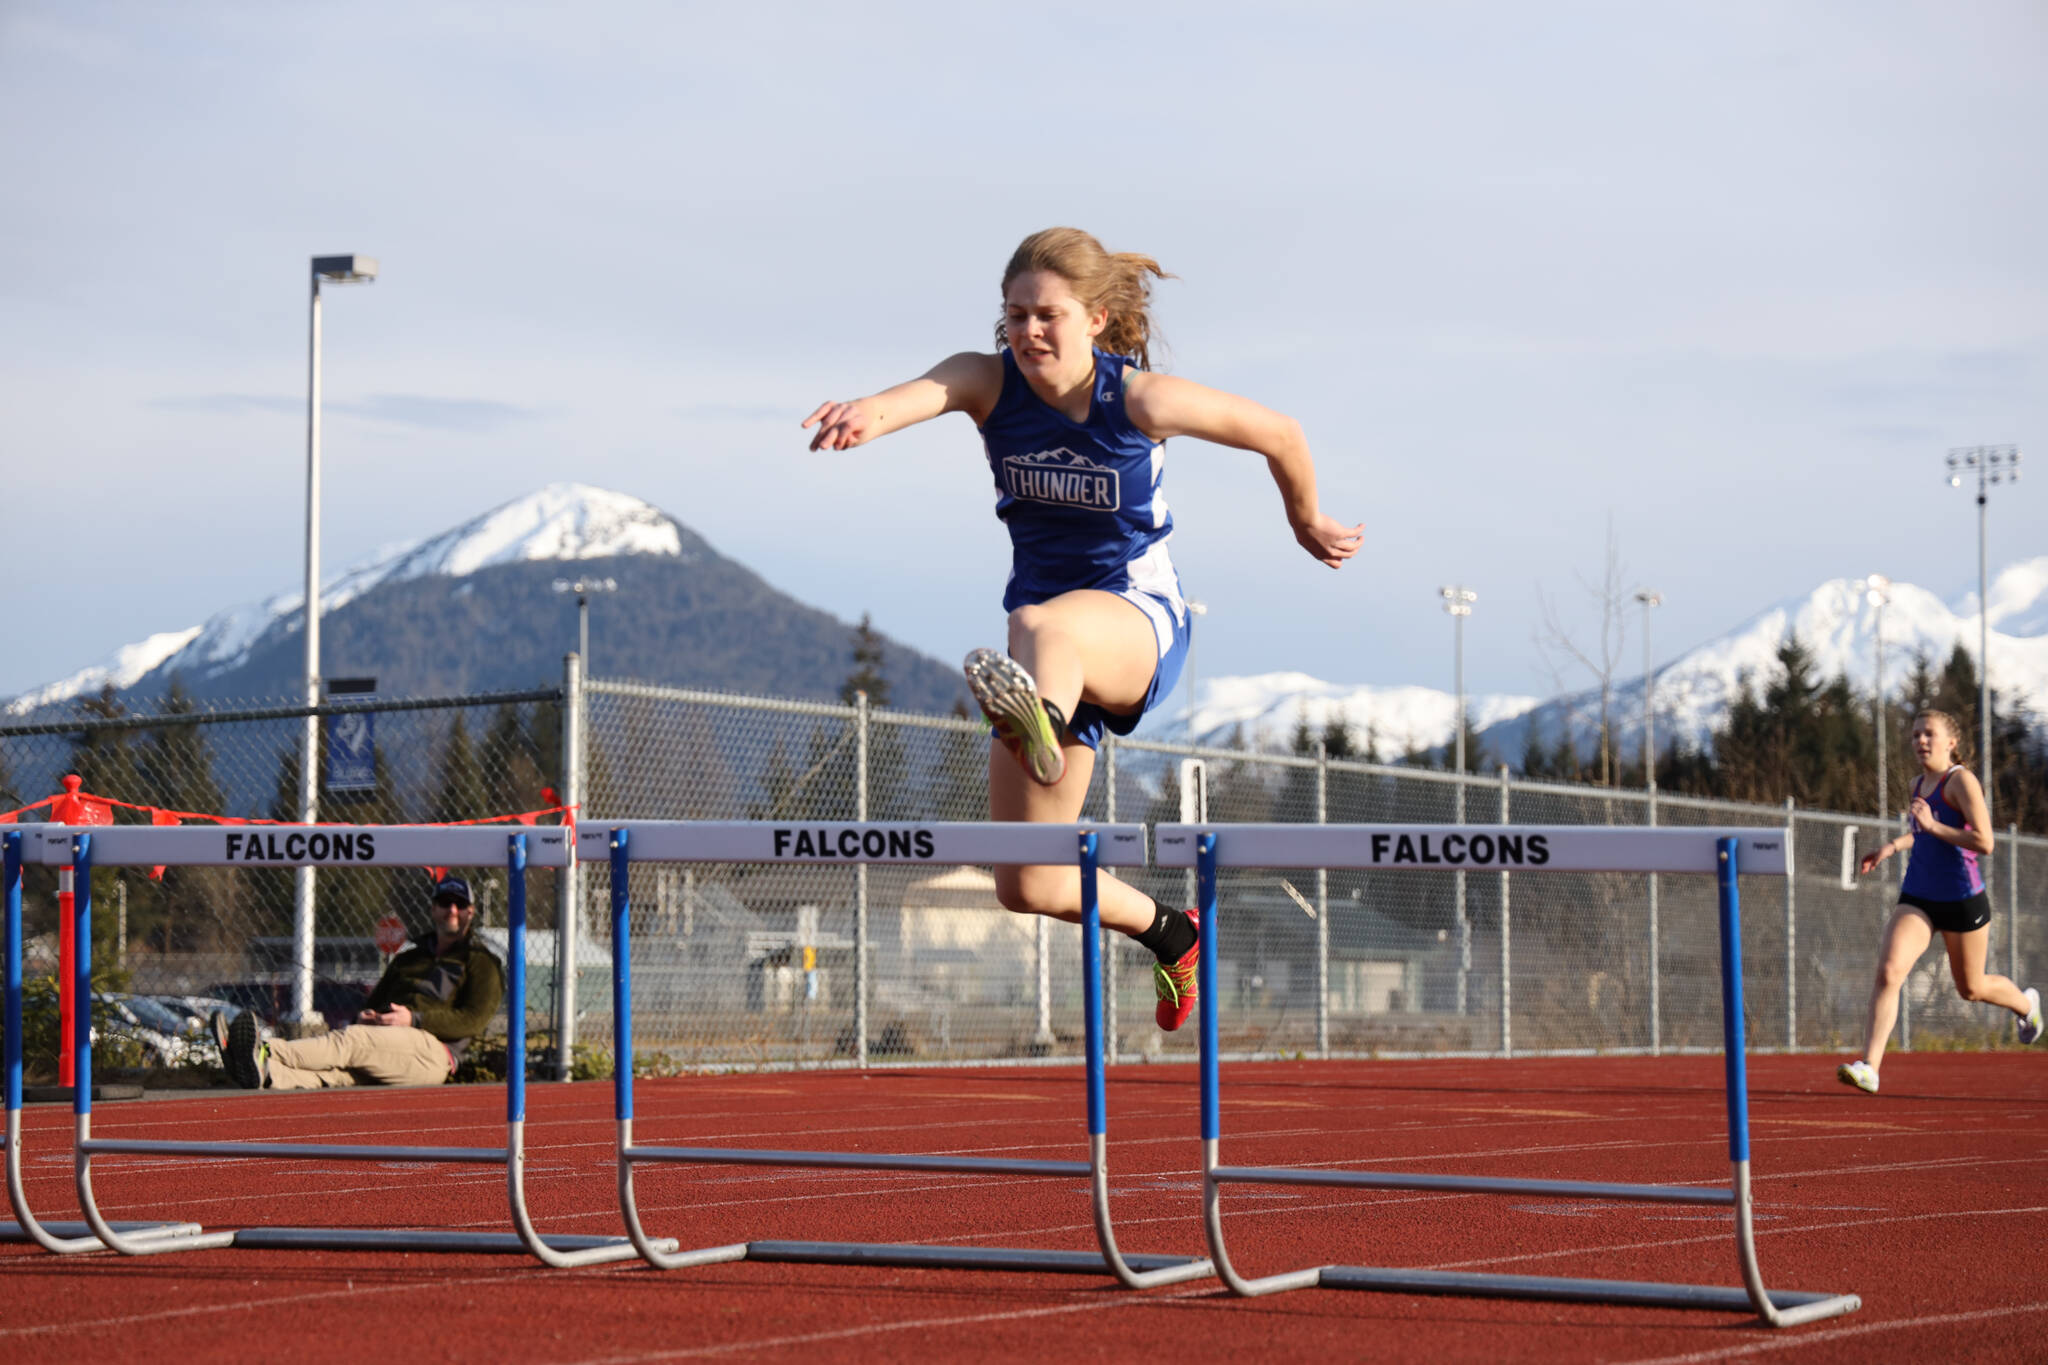 Thunder Mountain High School senior Mallory Welling launches over a hurdle during the 300 meter hurdle prelims at the Capital Invitational Track and Field meet Friday evening. (Clarise Larson / Juneau Empire)